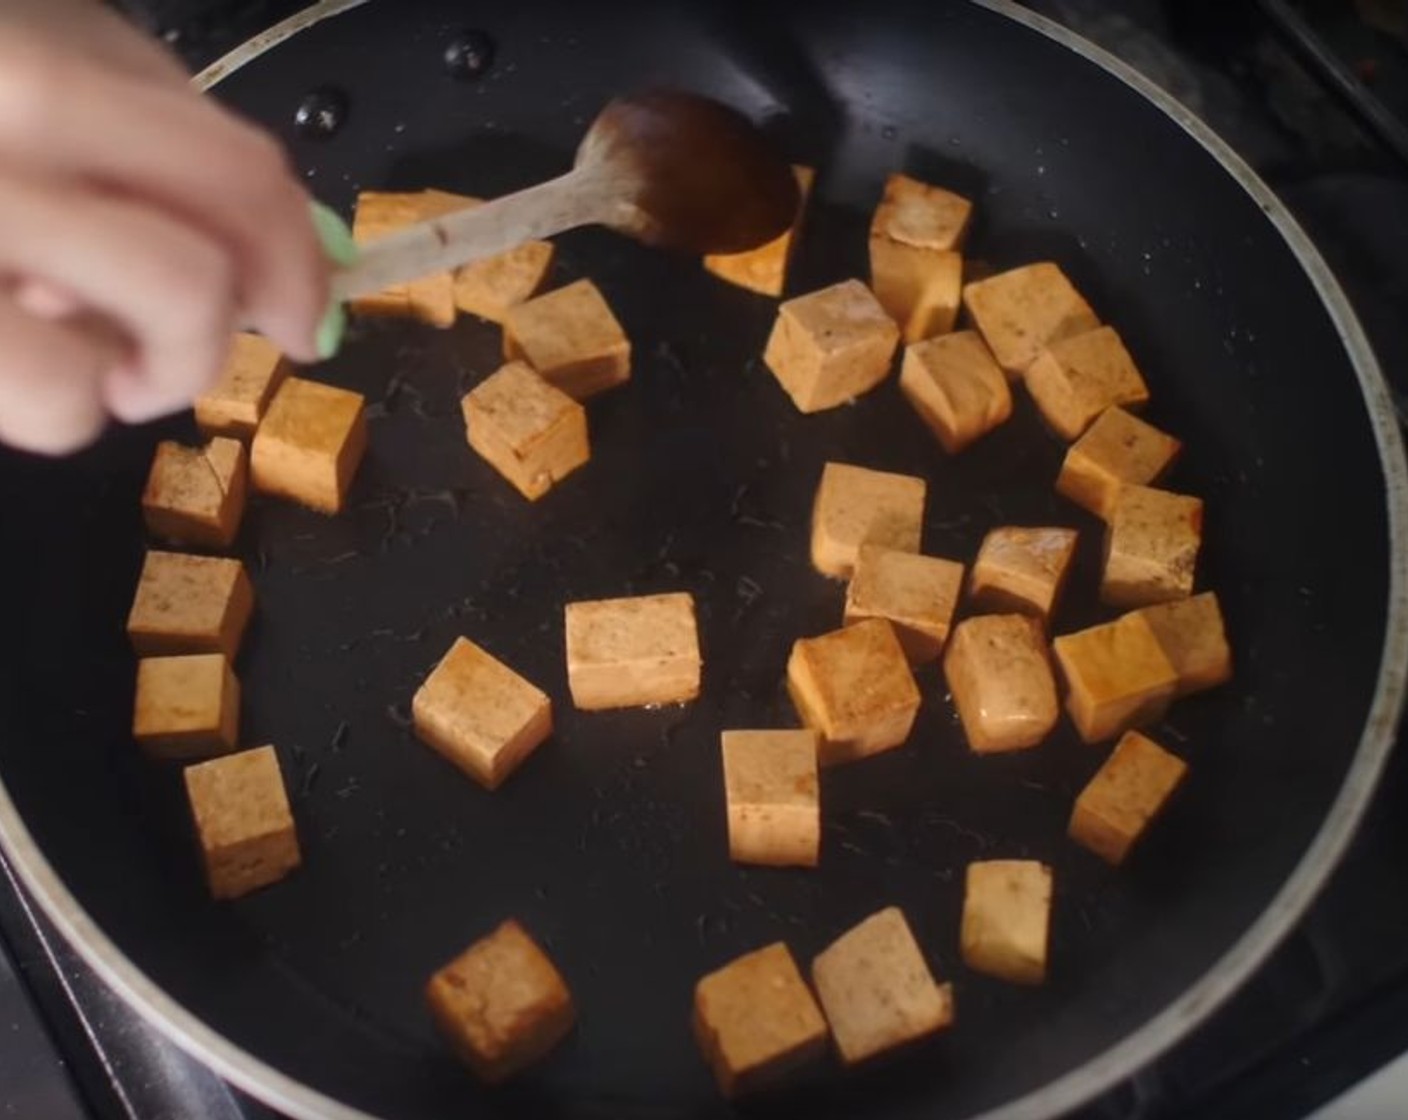 step 2 Heat a skillet over medium-high heat and add a generous splash of oil. Add cubed tofu and cook stirring occasionally, until all sides are golden brown. Remove tofu from skillet and set aside.